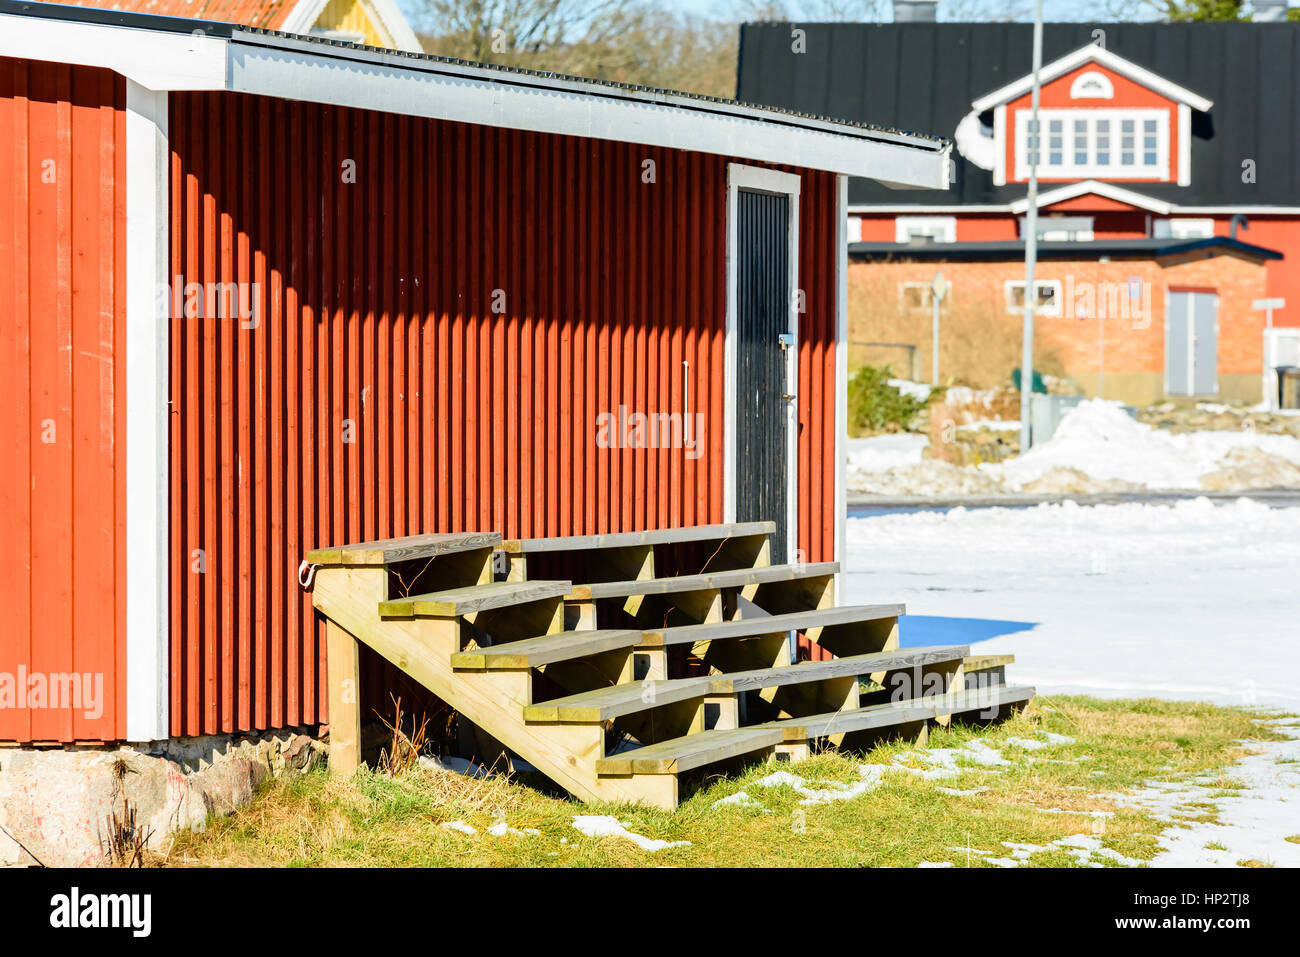 Makeshift wooden spectator bench or quire scene outside a red wooden shed. Thawing snow on the ground. House in background. Stock Photo